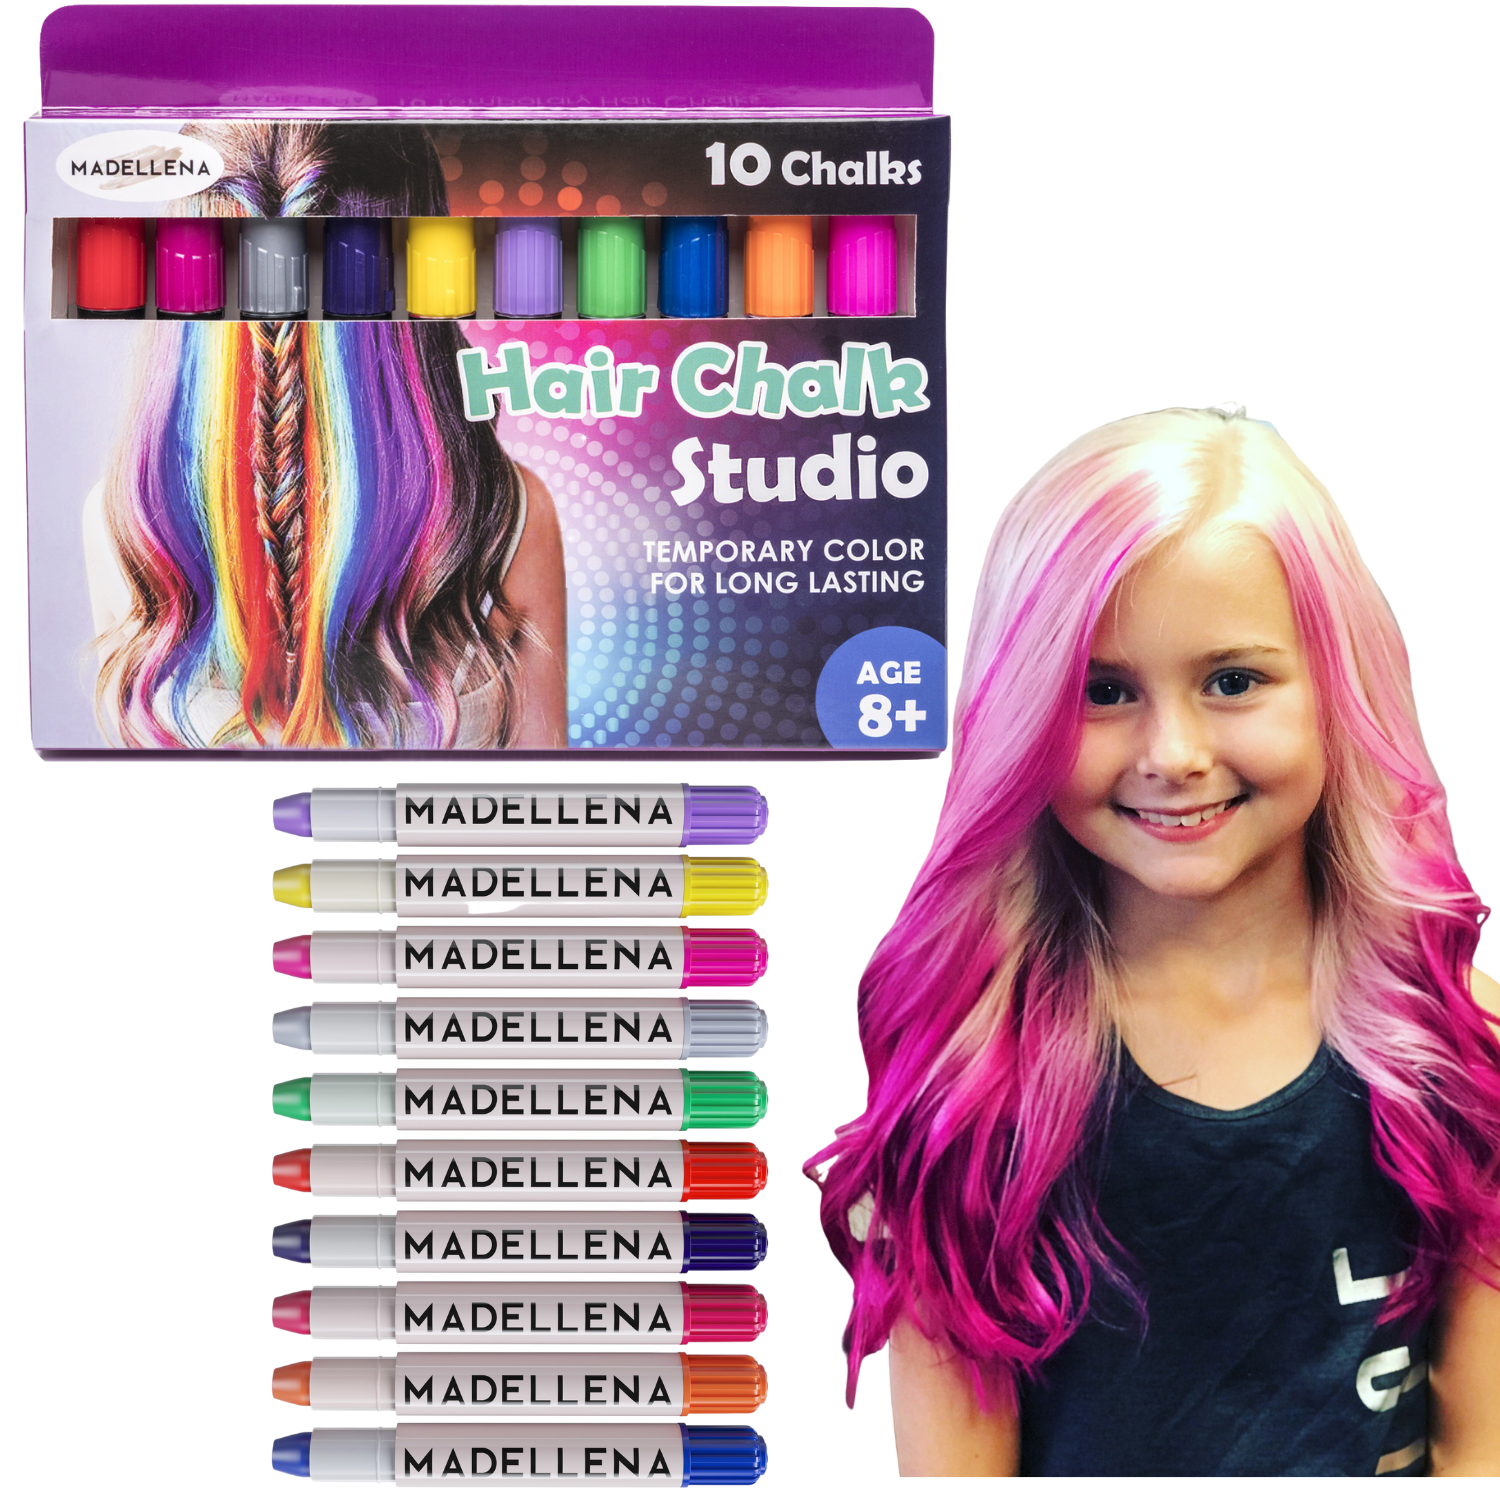 Hair Chalk For Kids - Hair Chalk for Girls - 10 Piece Temporary Hair Chalks - Birthday Gifts For Girls - Hair Chalk - Kids Hair Dye - Hair Chalk Set, Gifts for Girls Ages 3, 4, 5, 6 ,7, 8, 9, 10 - image 1 of 5